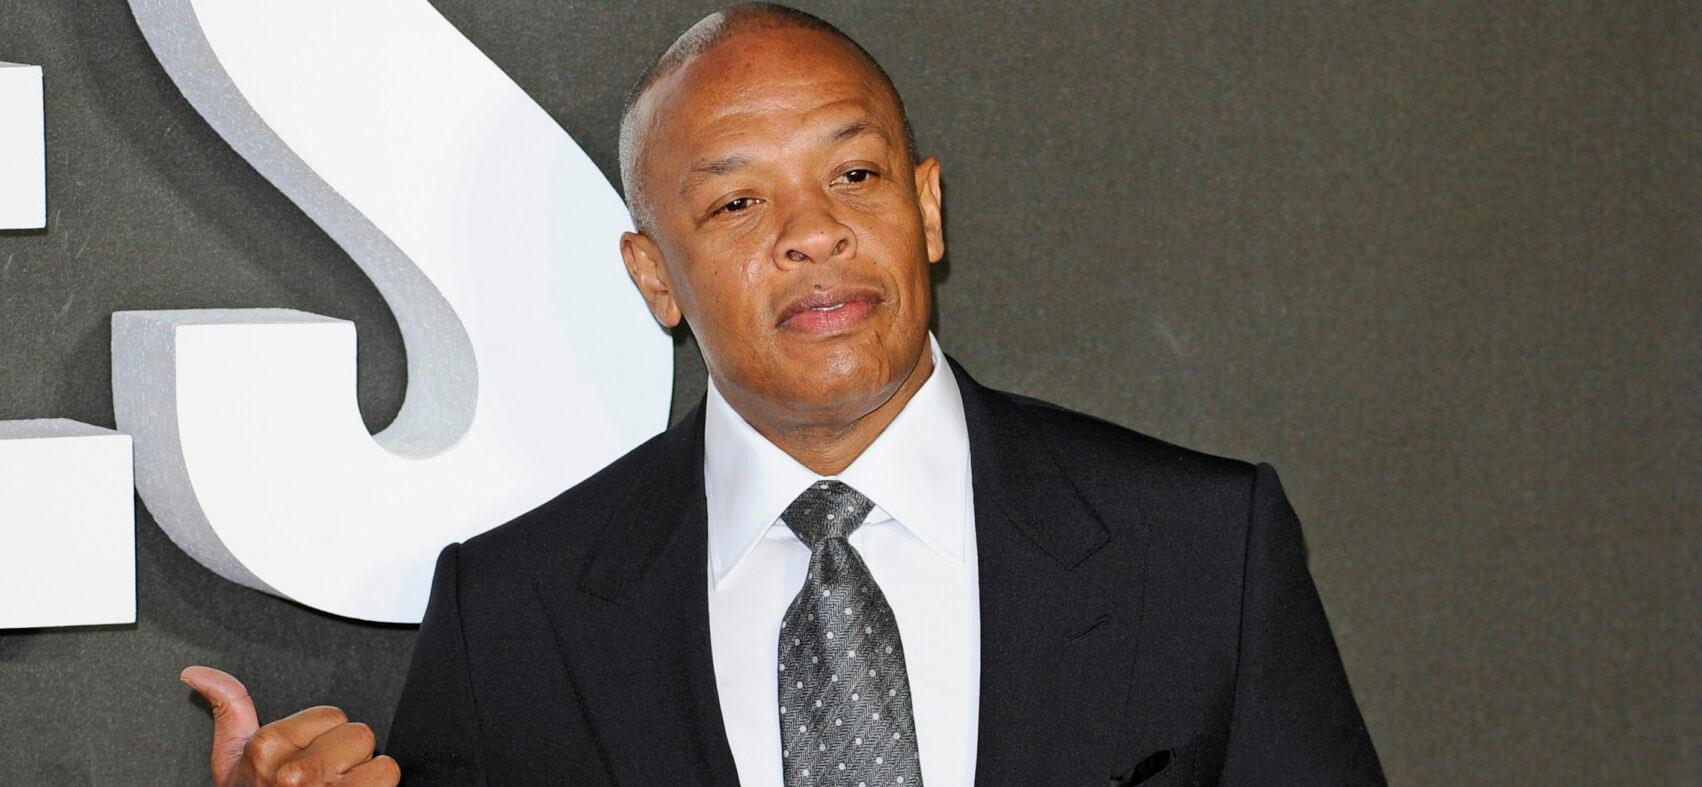 Dr. Dre On His Way To Billionaire Status Amid $200 Million Sale Of Music Catalog